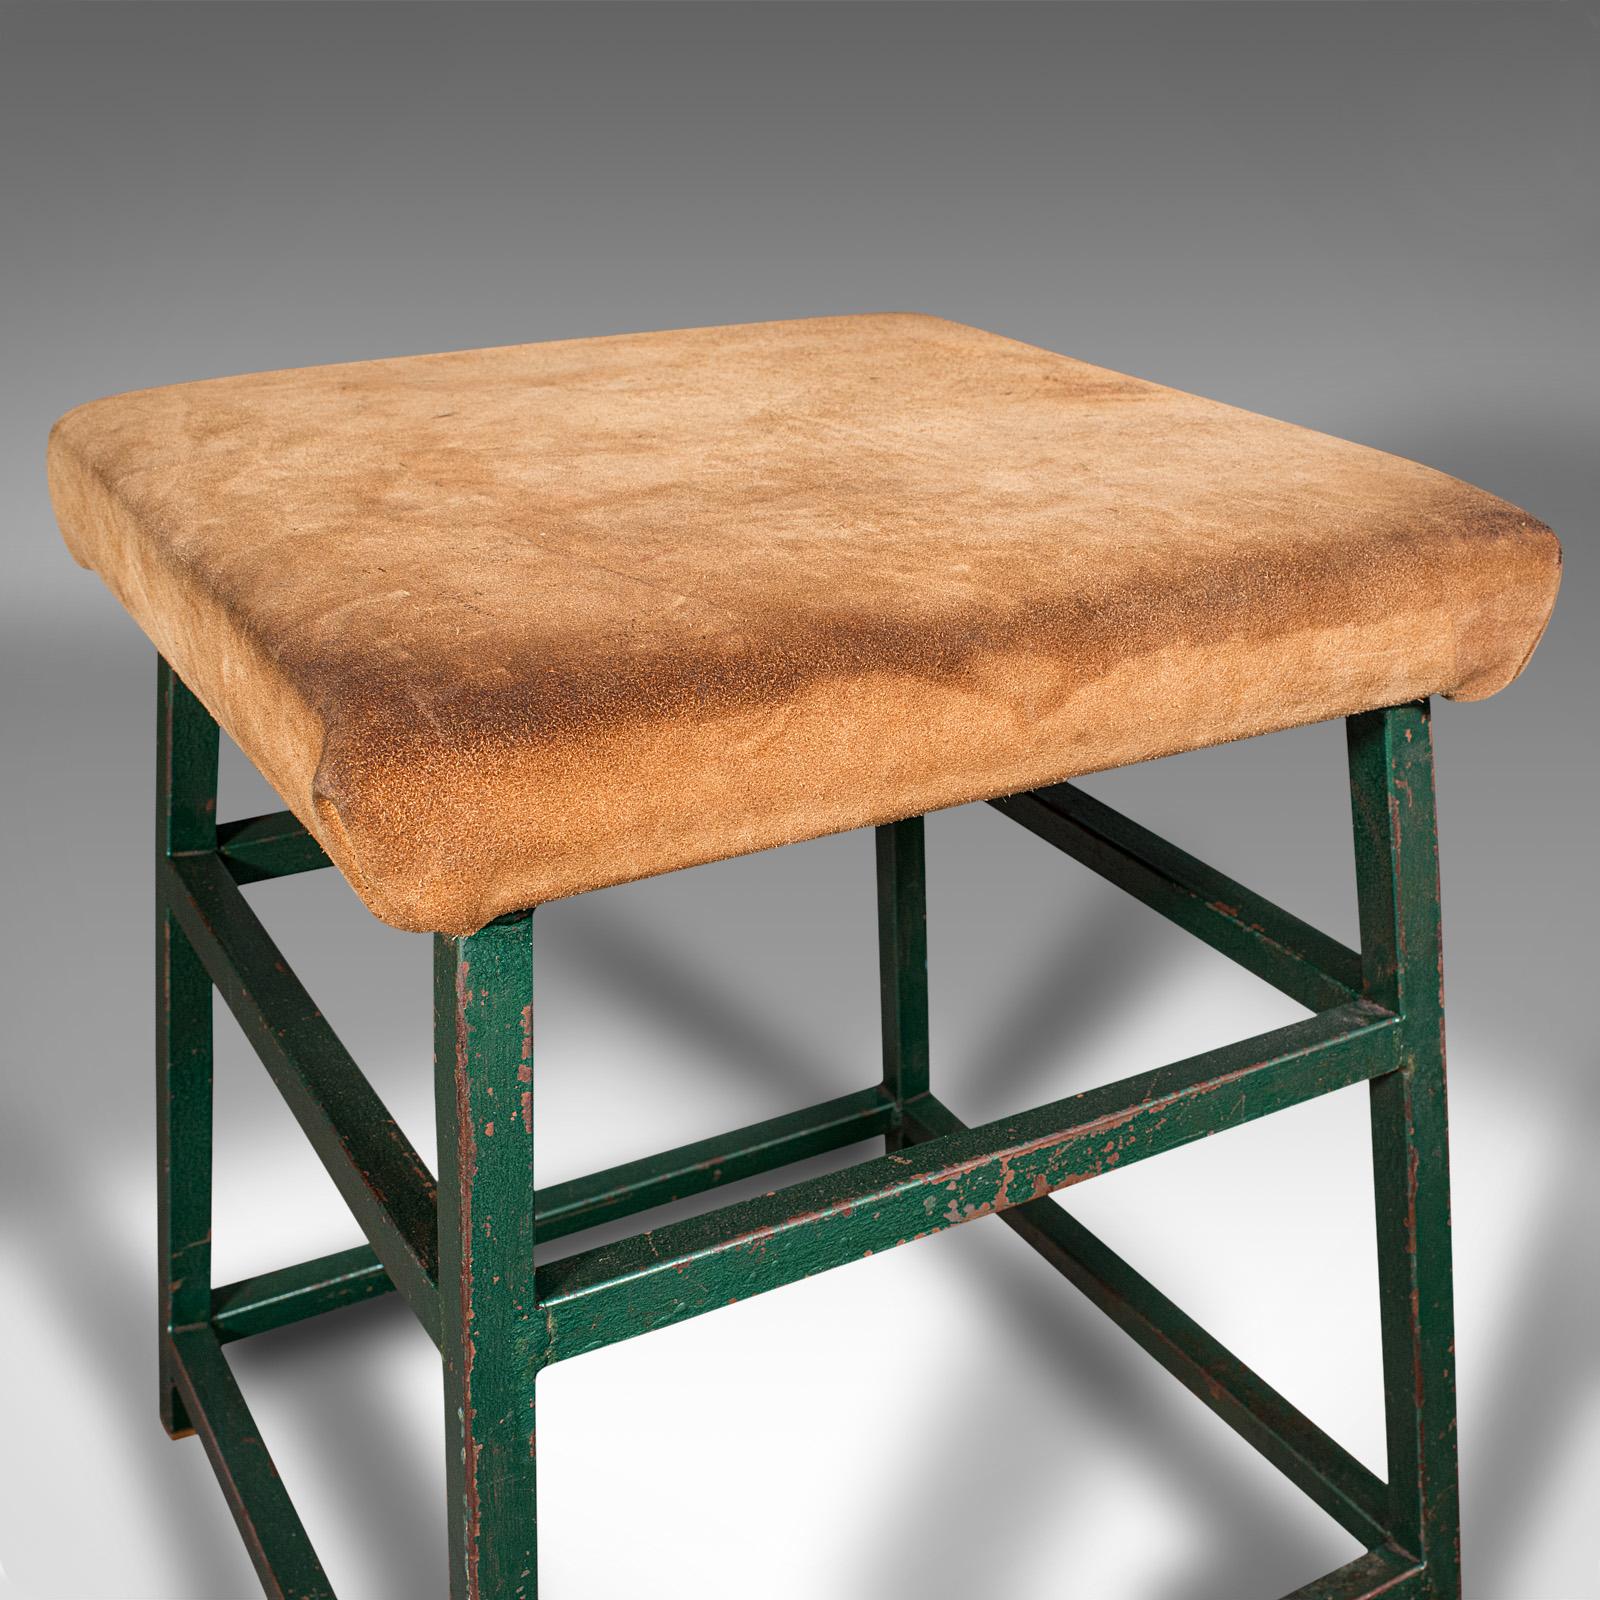 Steel Large Vintage Industrial Lab Stool, English, Suede, Kitchen, Office Seat, C.1950 For Sale